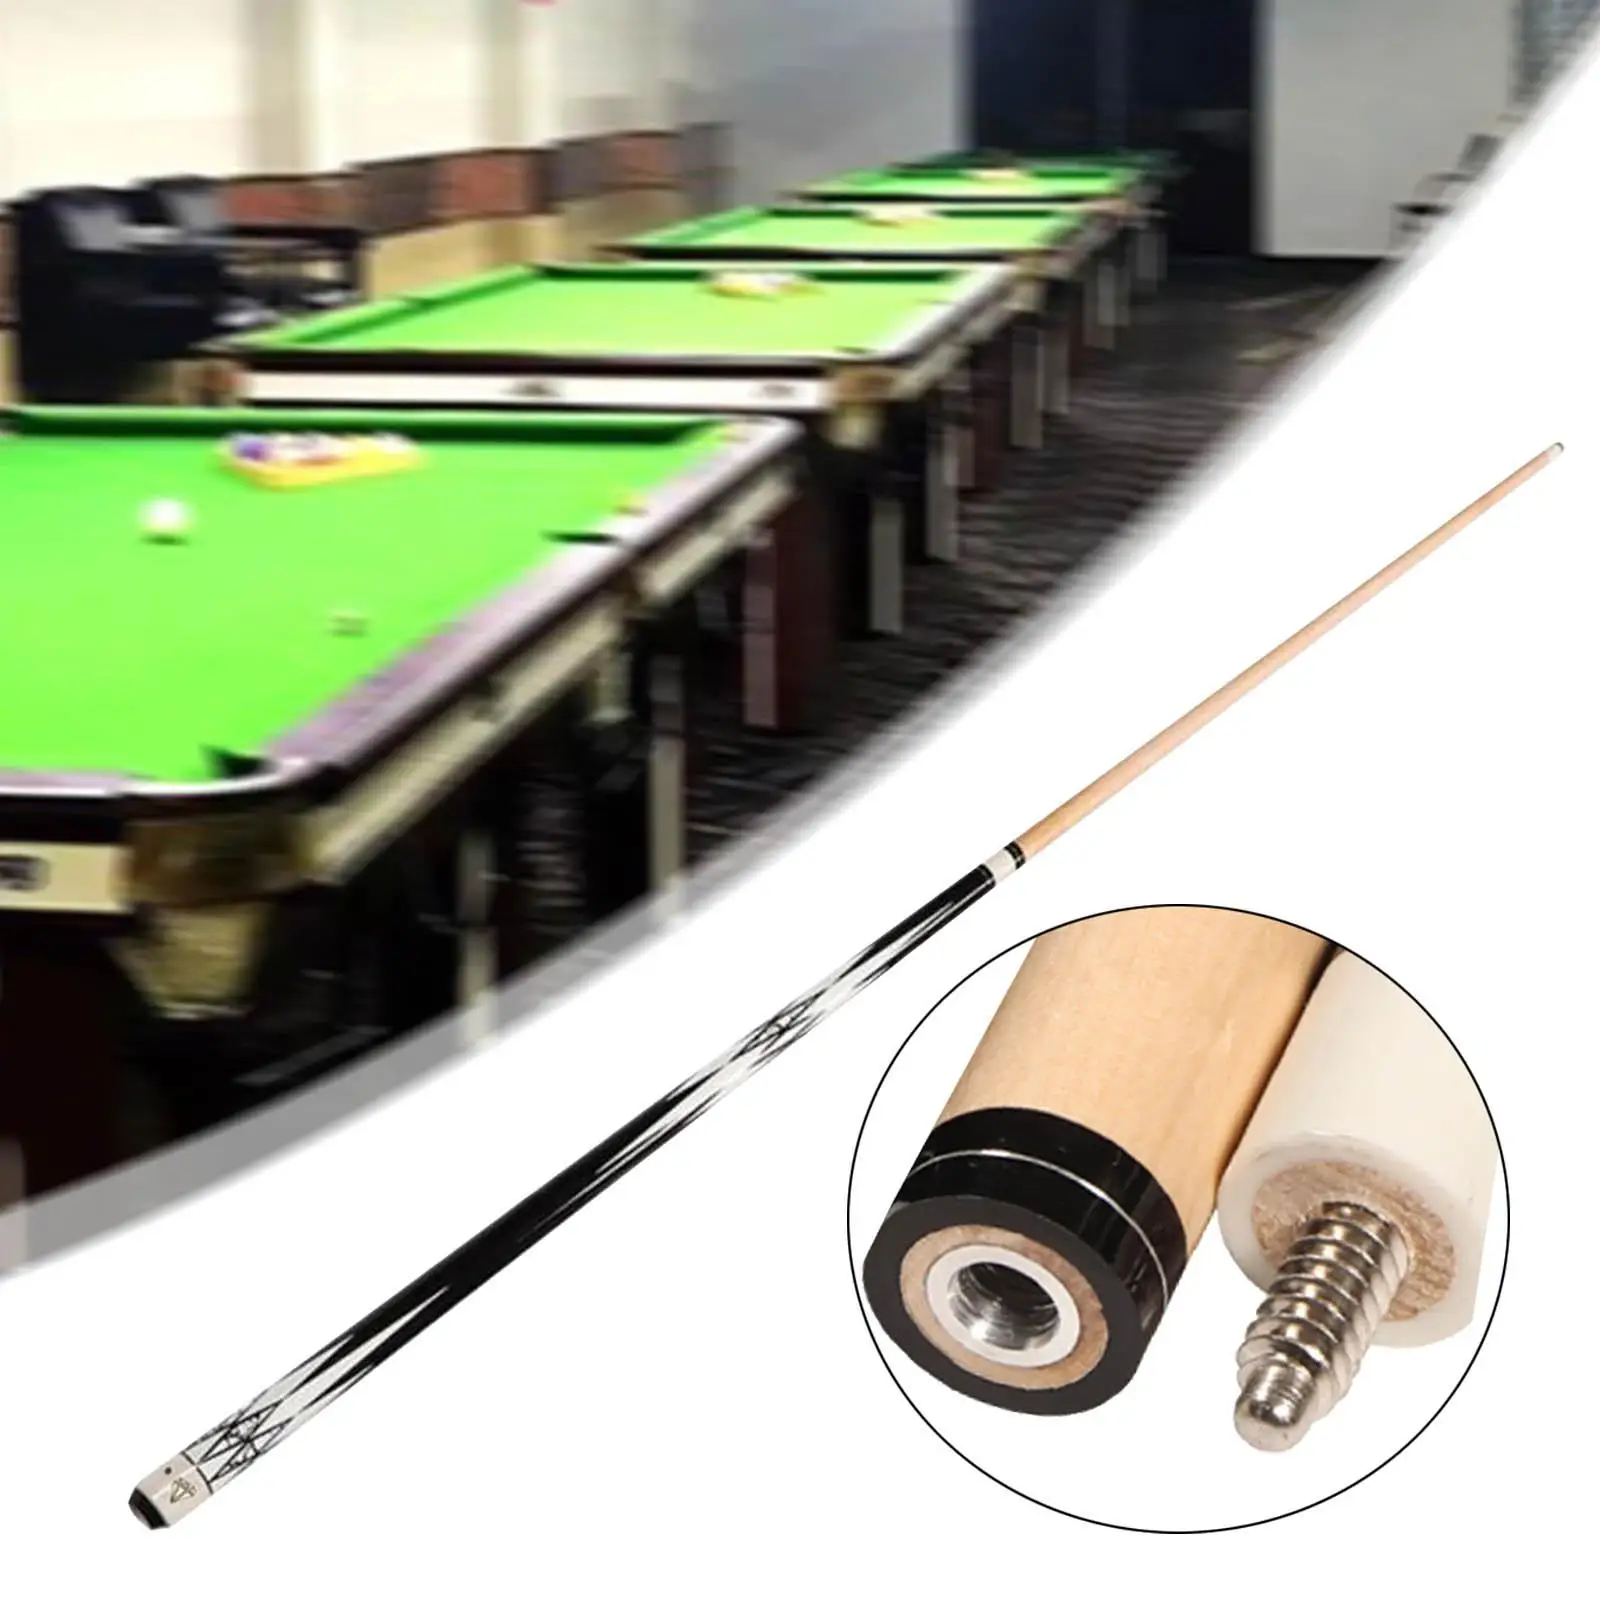 Pool Cues Stick 1/2 Full Size 57 inch Nine Ball Pool Cue British Snooker Cue